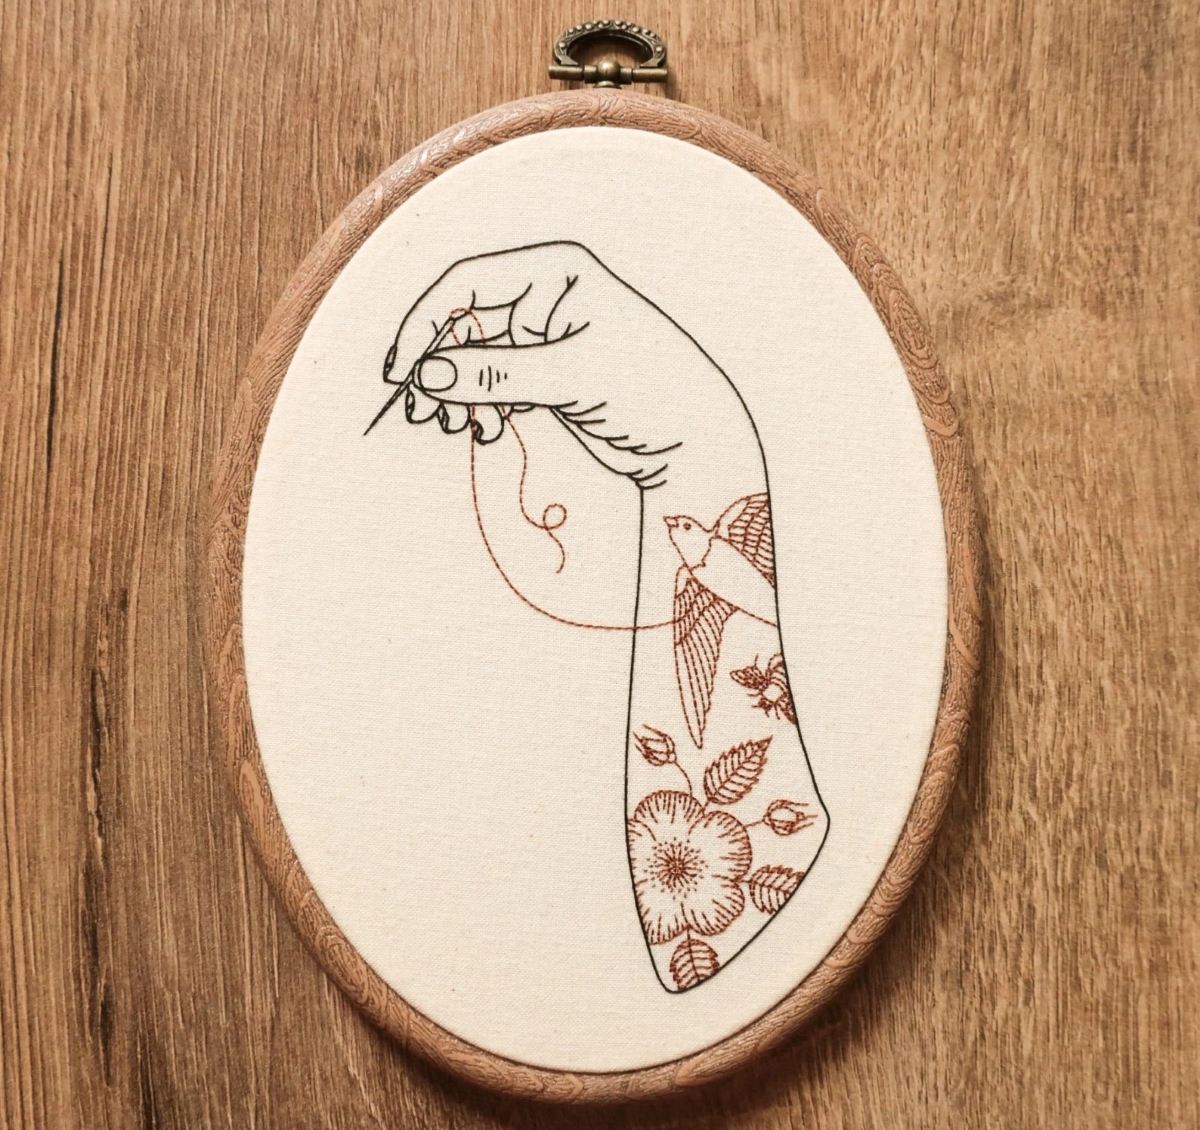 Embroidered hand stitching